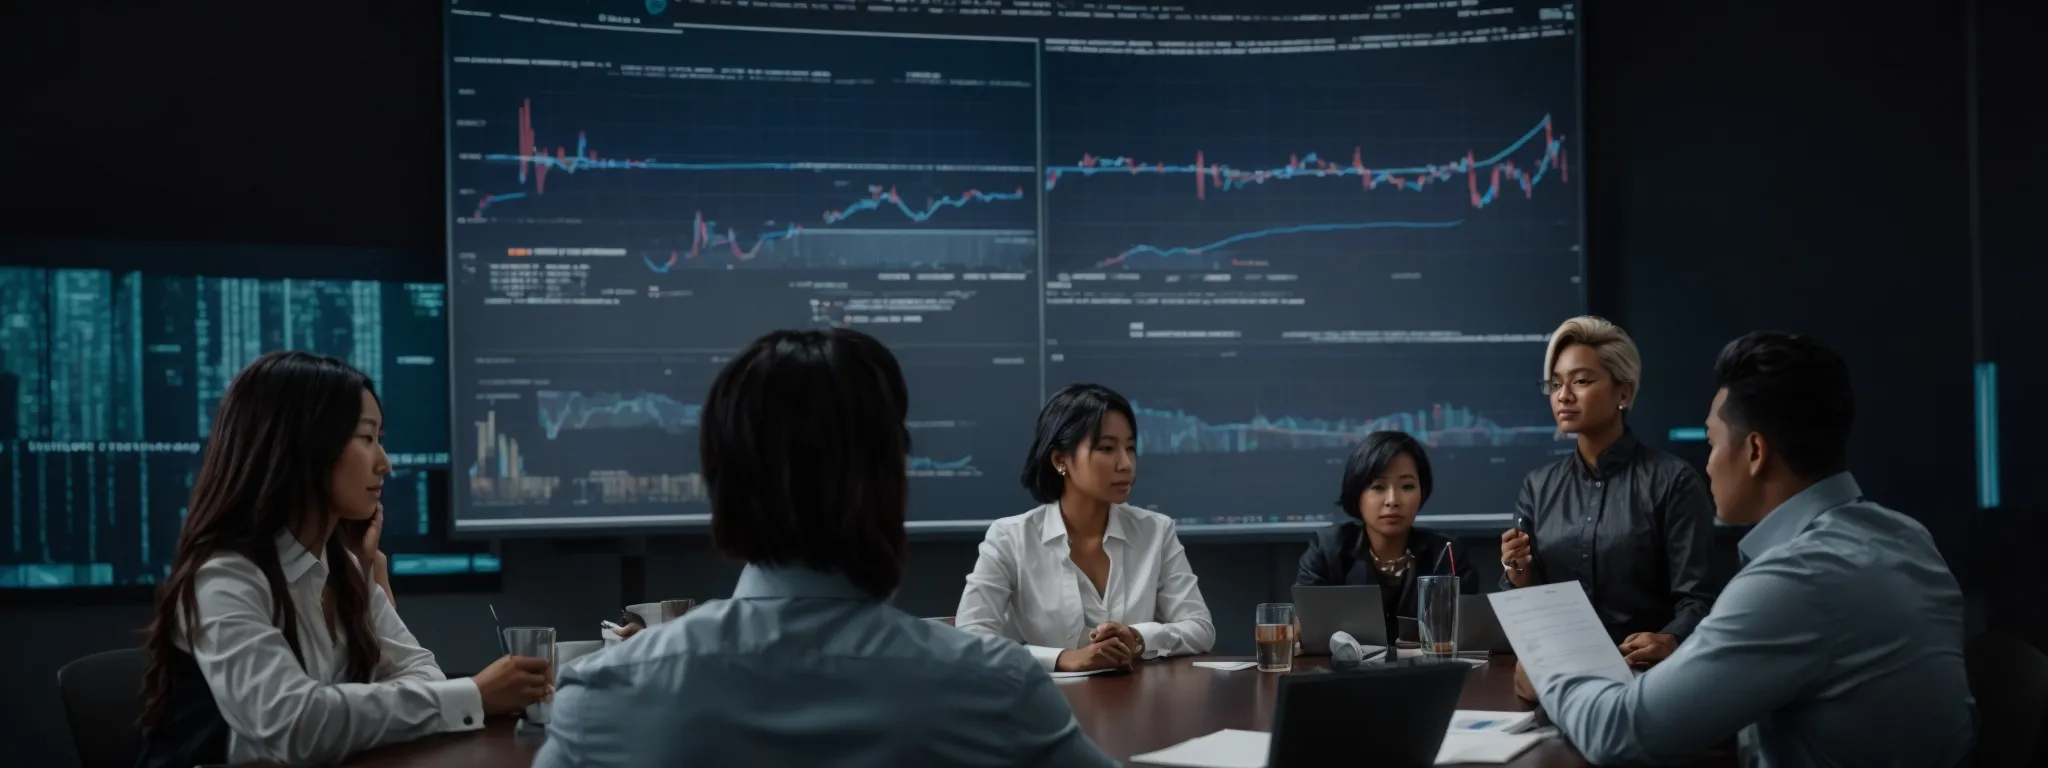 a diverse group of professionals gathered around a table, discussing strategies with futuristic digital marketing charts and projections displayed on a screen.